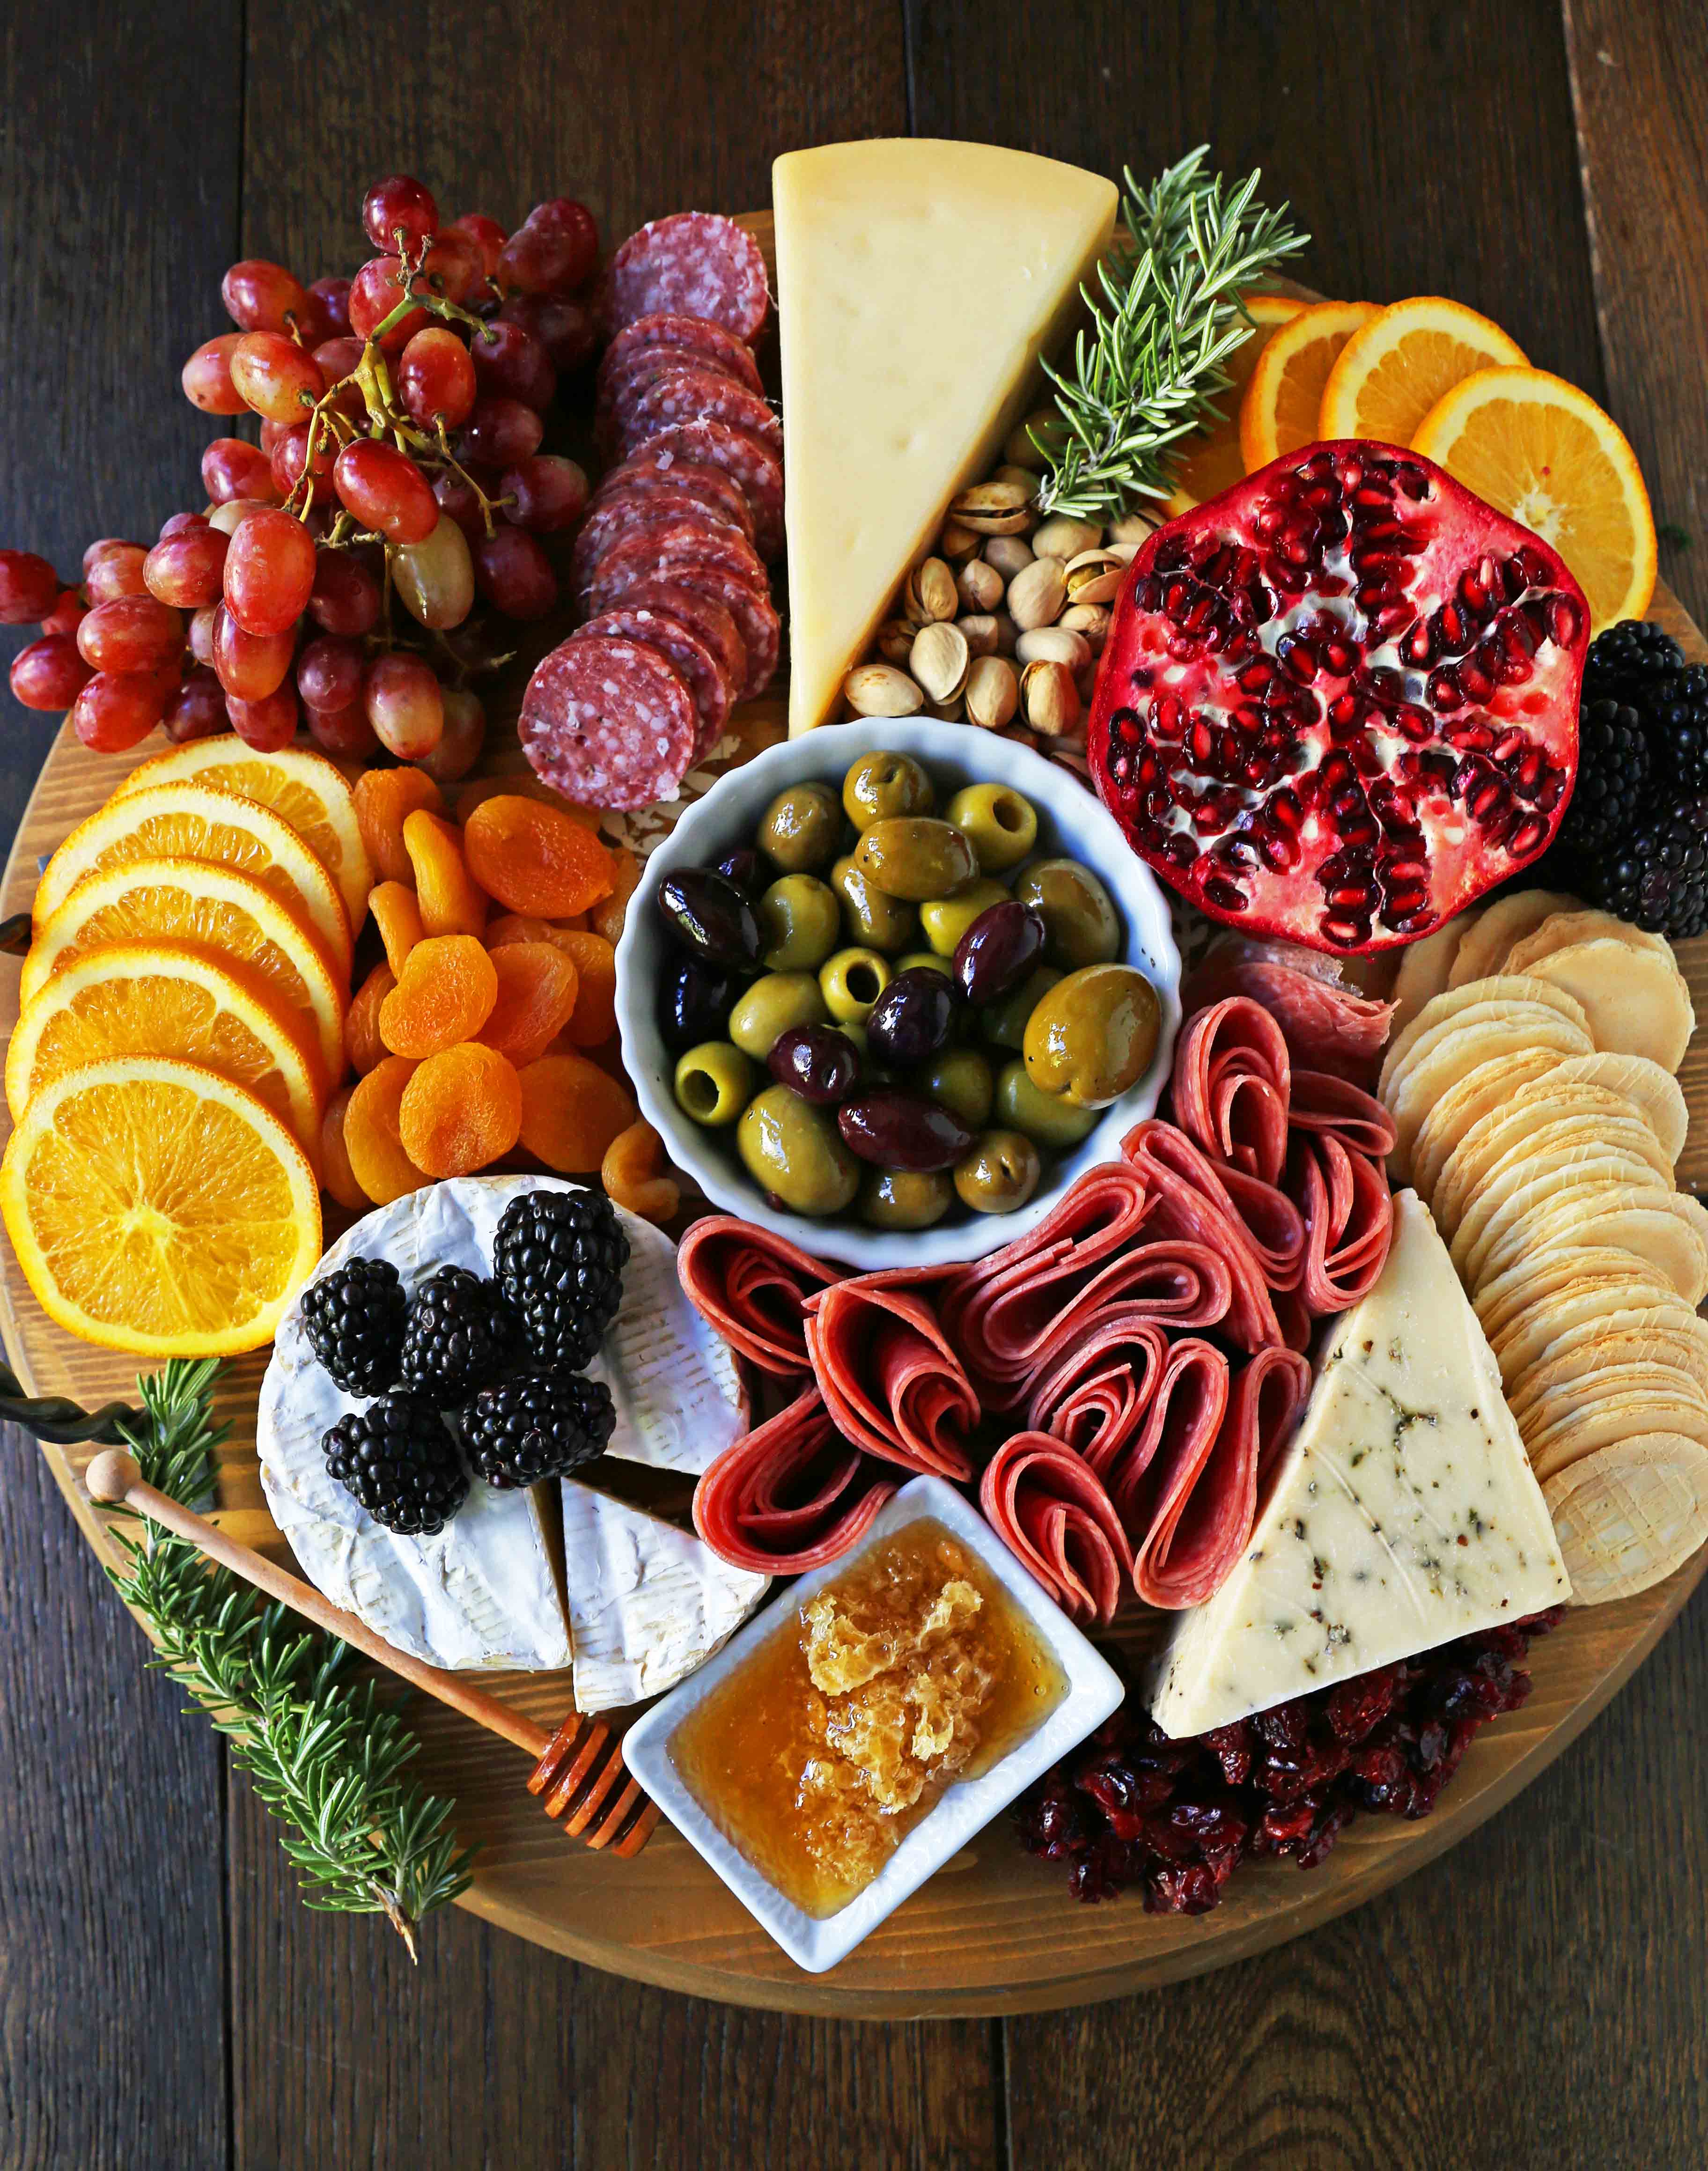 How to make an EPIC Charcuterie Board (AKA Meat and Cheese Platter). How to make a beautiful meat cheese and fruit platter. The perfect appetizer for your next party! www.modernhoney.com #meatboard #meatandcheeseboard #appetizer #appetizers #charcuterieboard #charcuterie #cheeseboard